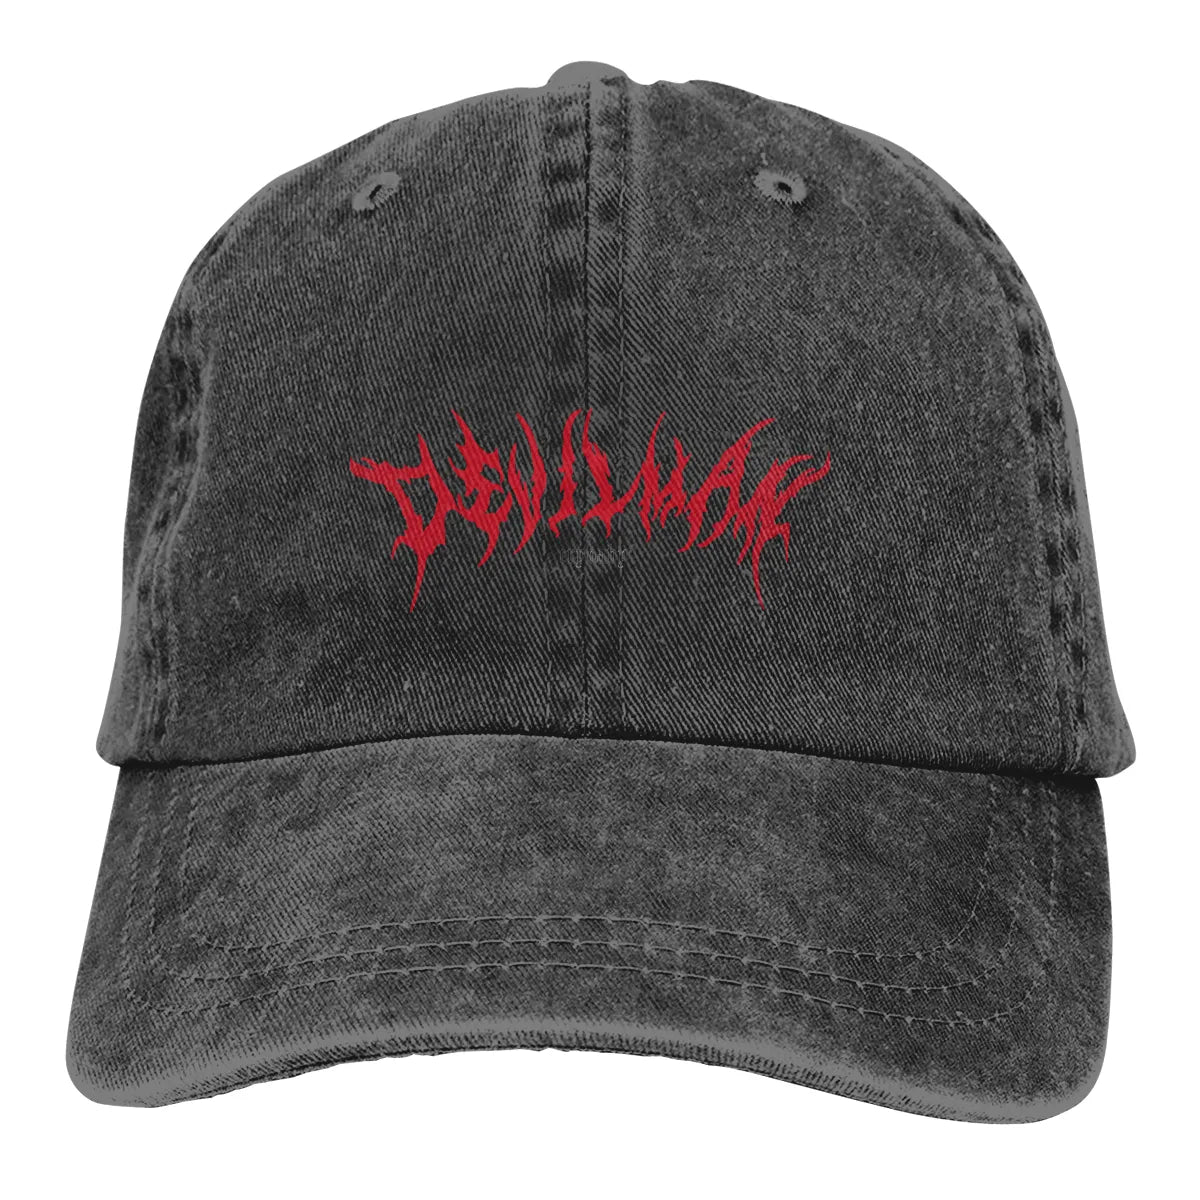 It's more than just a cap it's a symbol of your emblem of your sprit| If you are looking for more Devilman Crybaby Merch, We have it all! | Check out all our Anime Merch now!